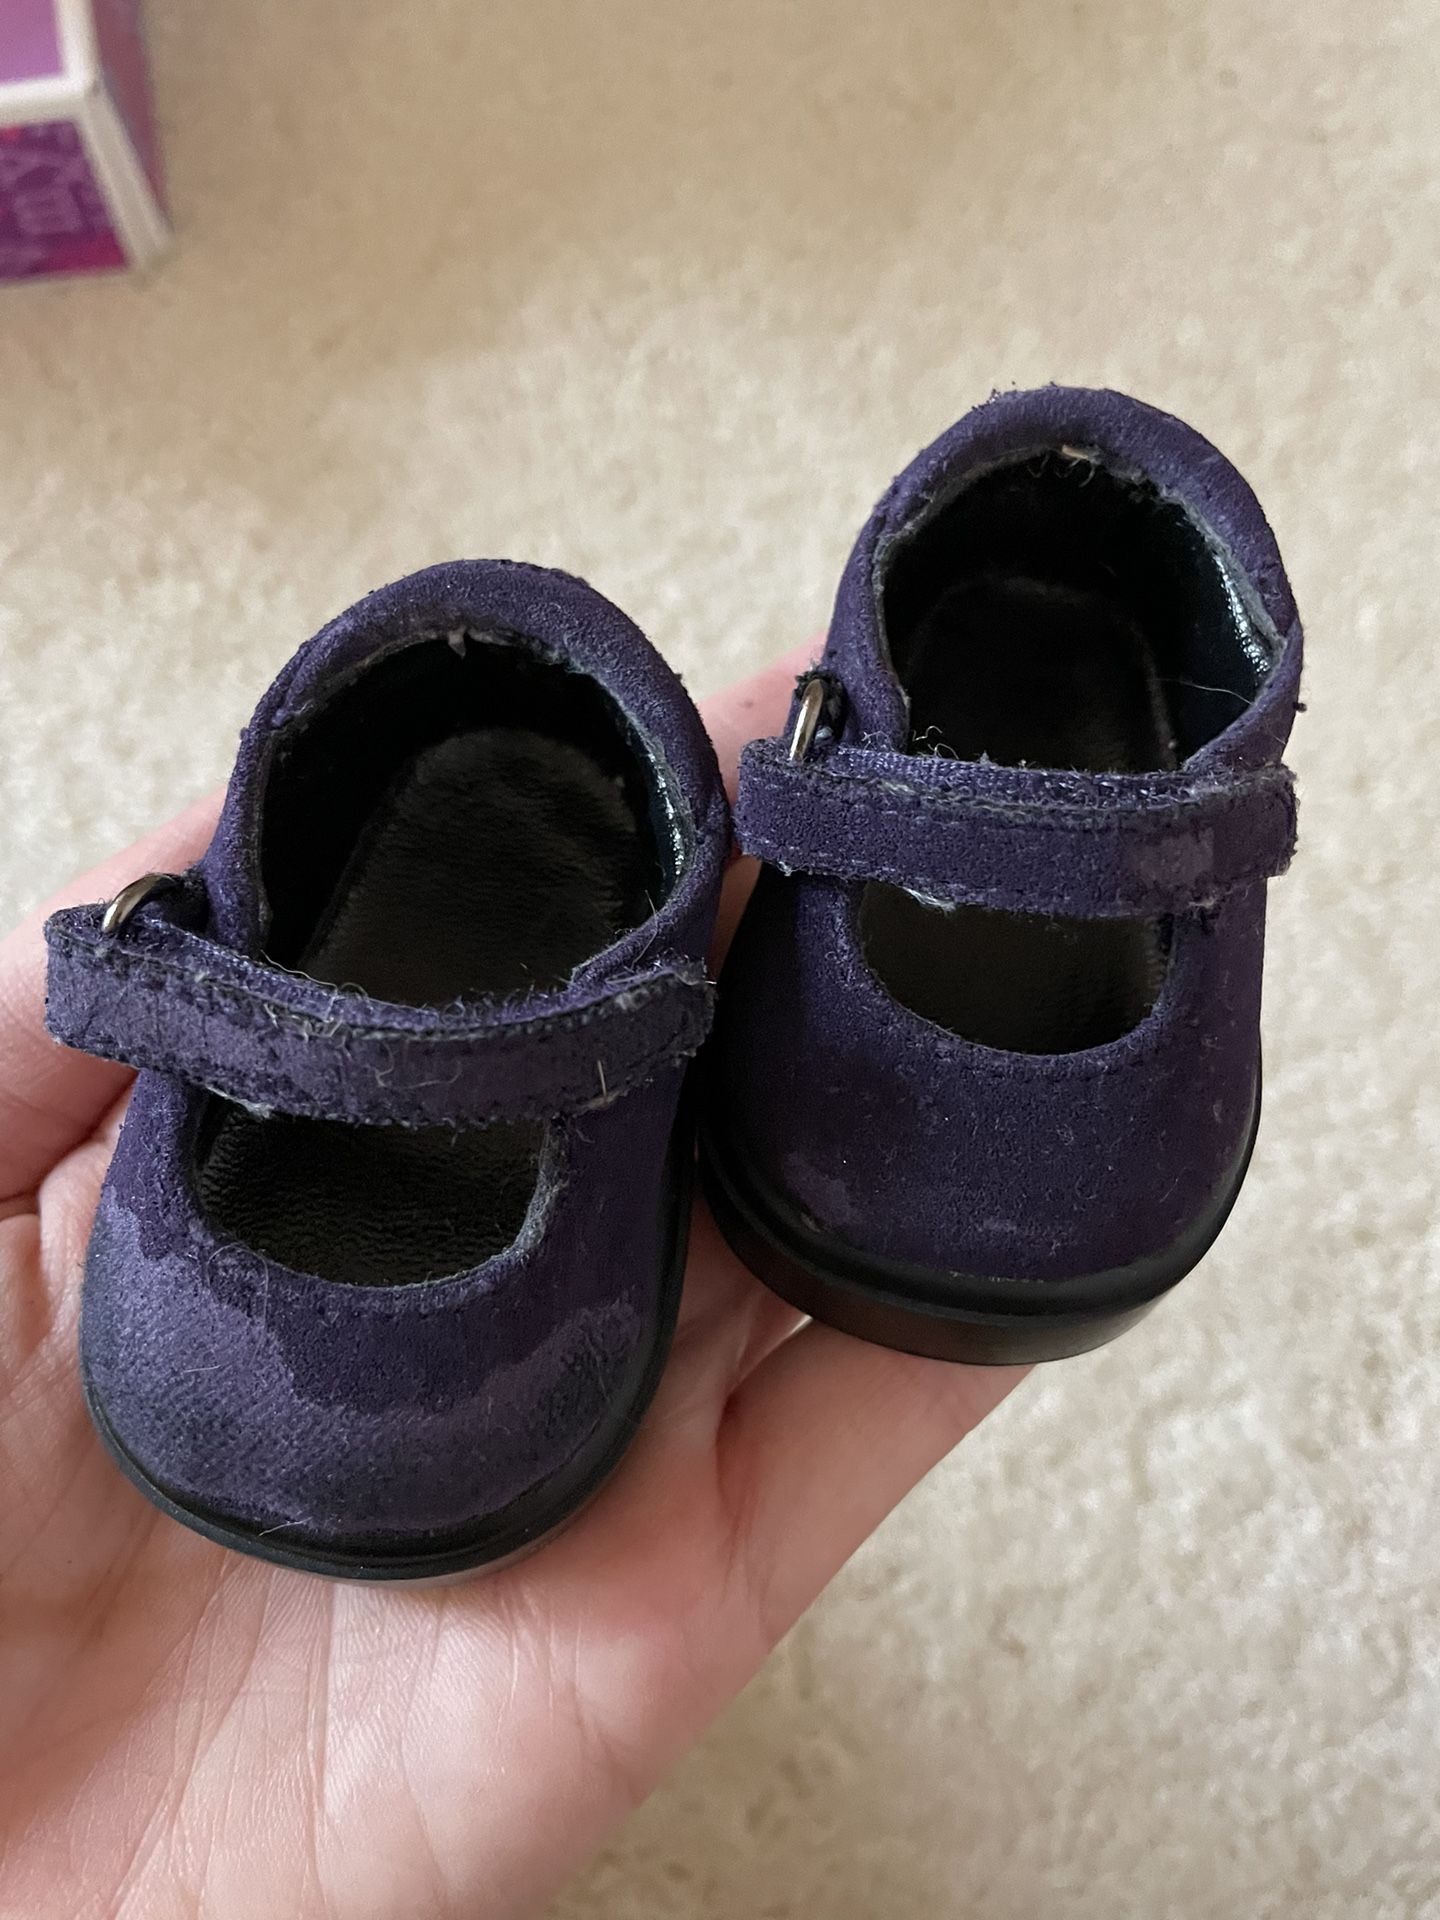 AMERICAN GIRL PC Doll School Shoes -Released 2001/ Retired 2003